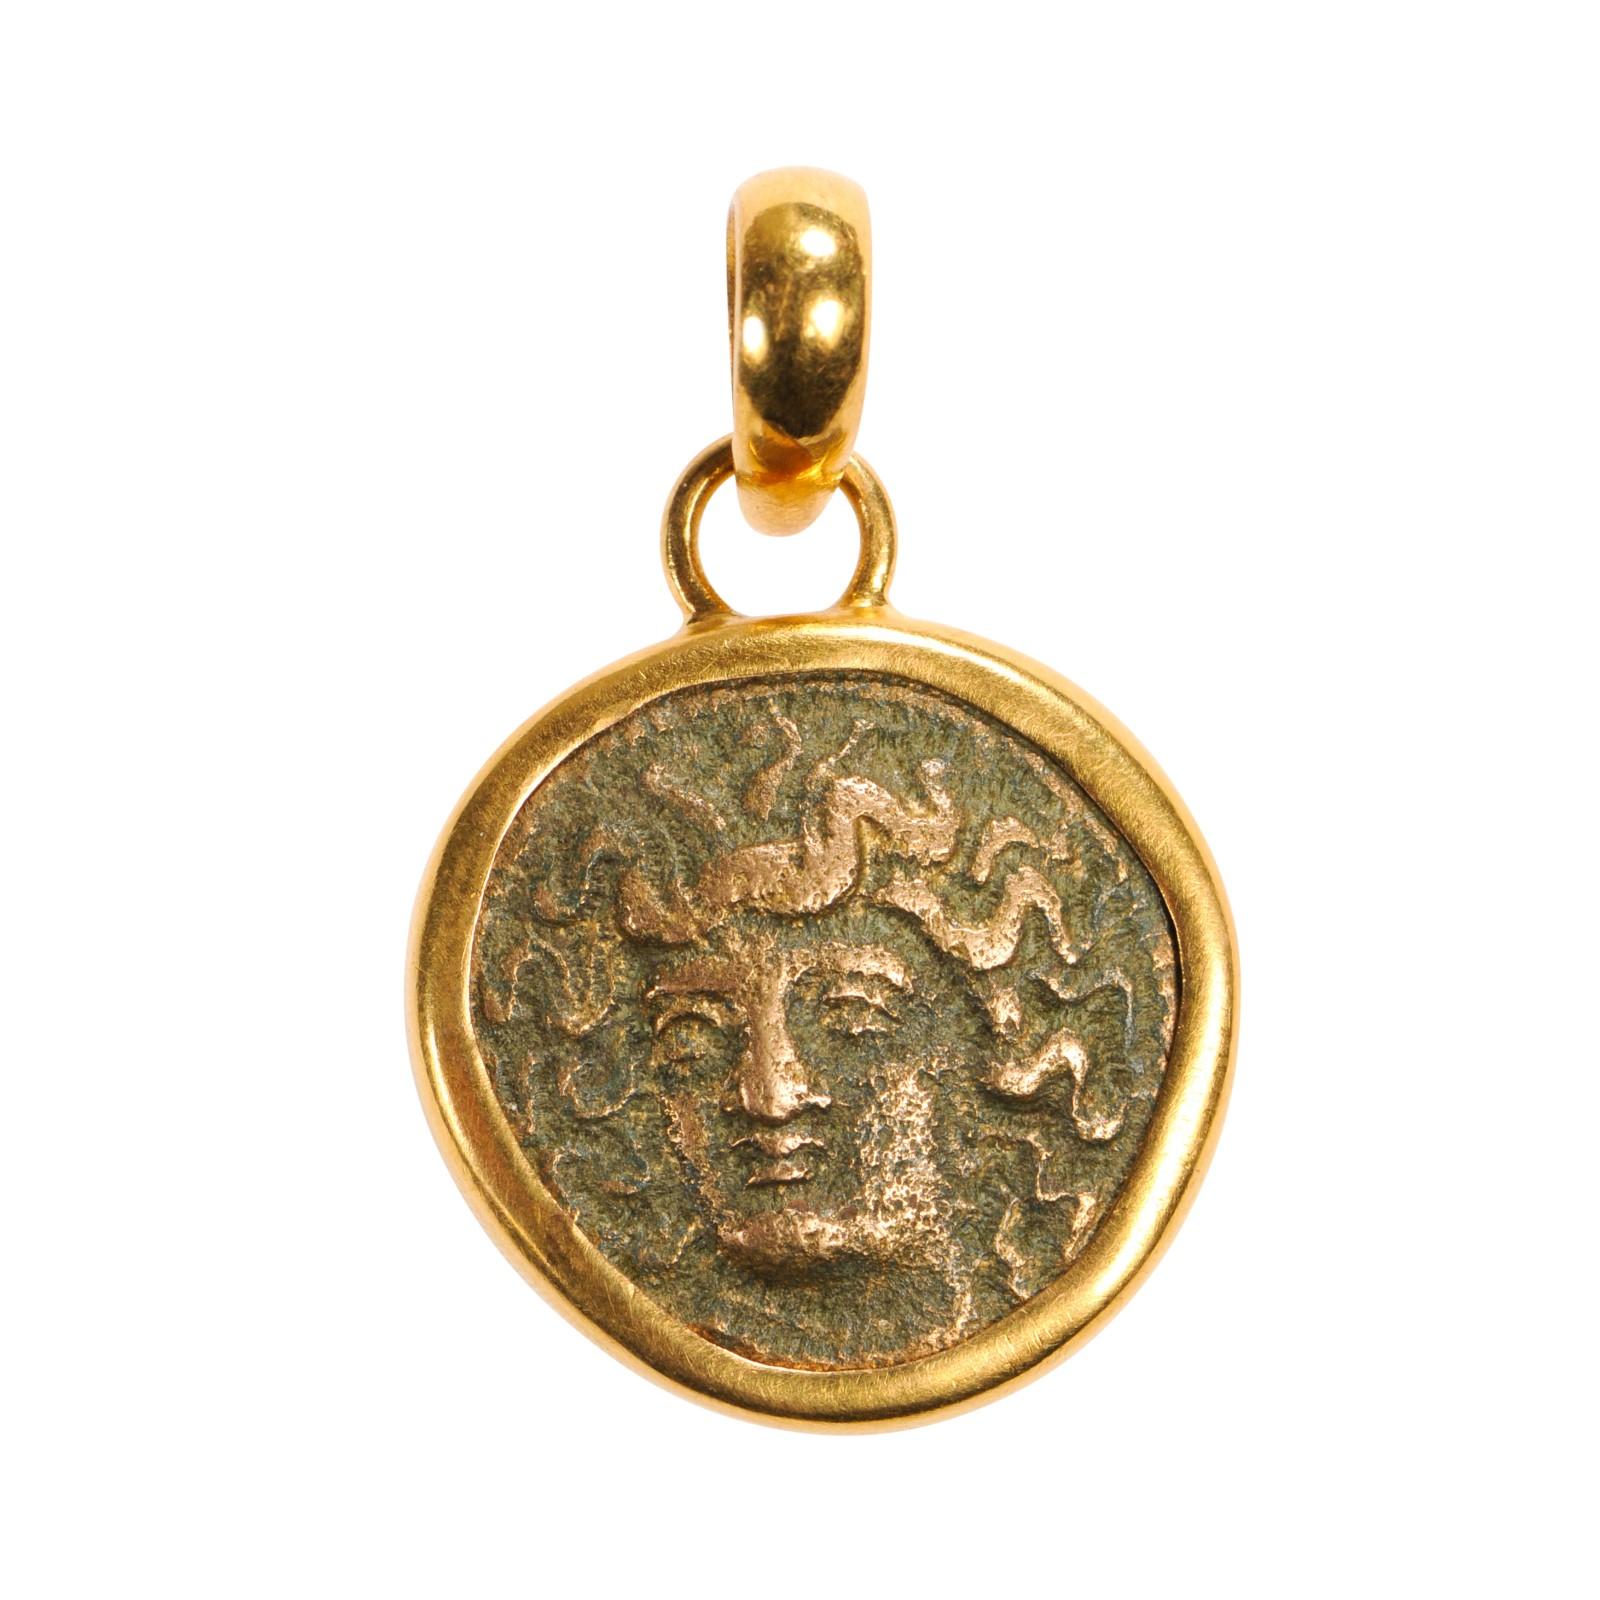 An Authentic Greek bronze Tetrachalkon coin (circa 400-344 BC). This ancient Greek coin has been set within a custom 22k gold bezel with 22k gold bail. The obverse, or front side of this coin, features the head of Nymph Larrisa. On the reverse side,